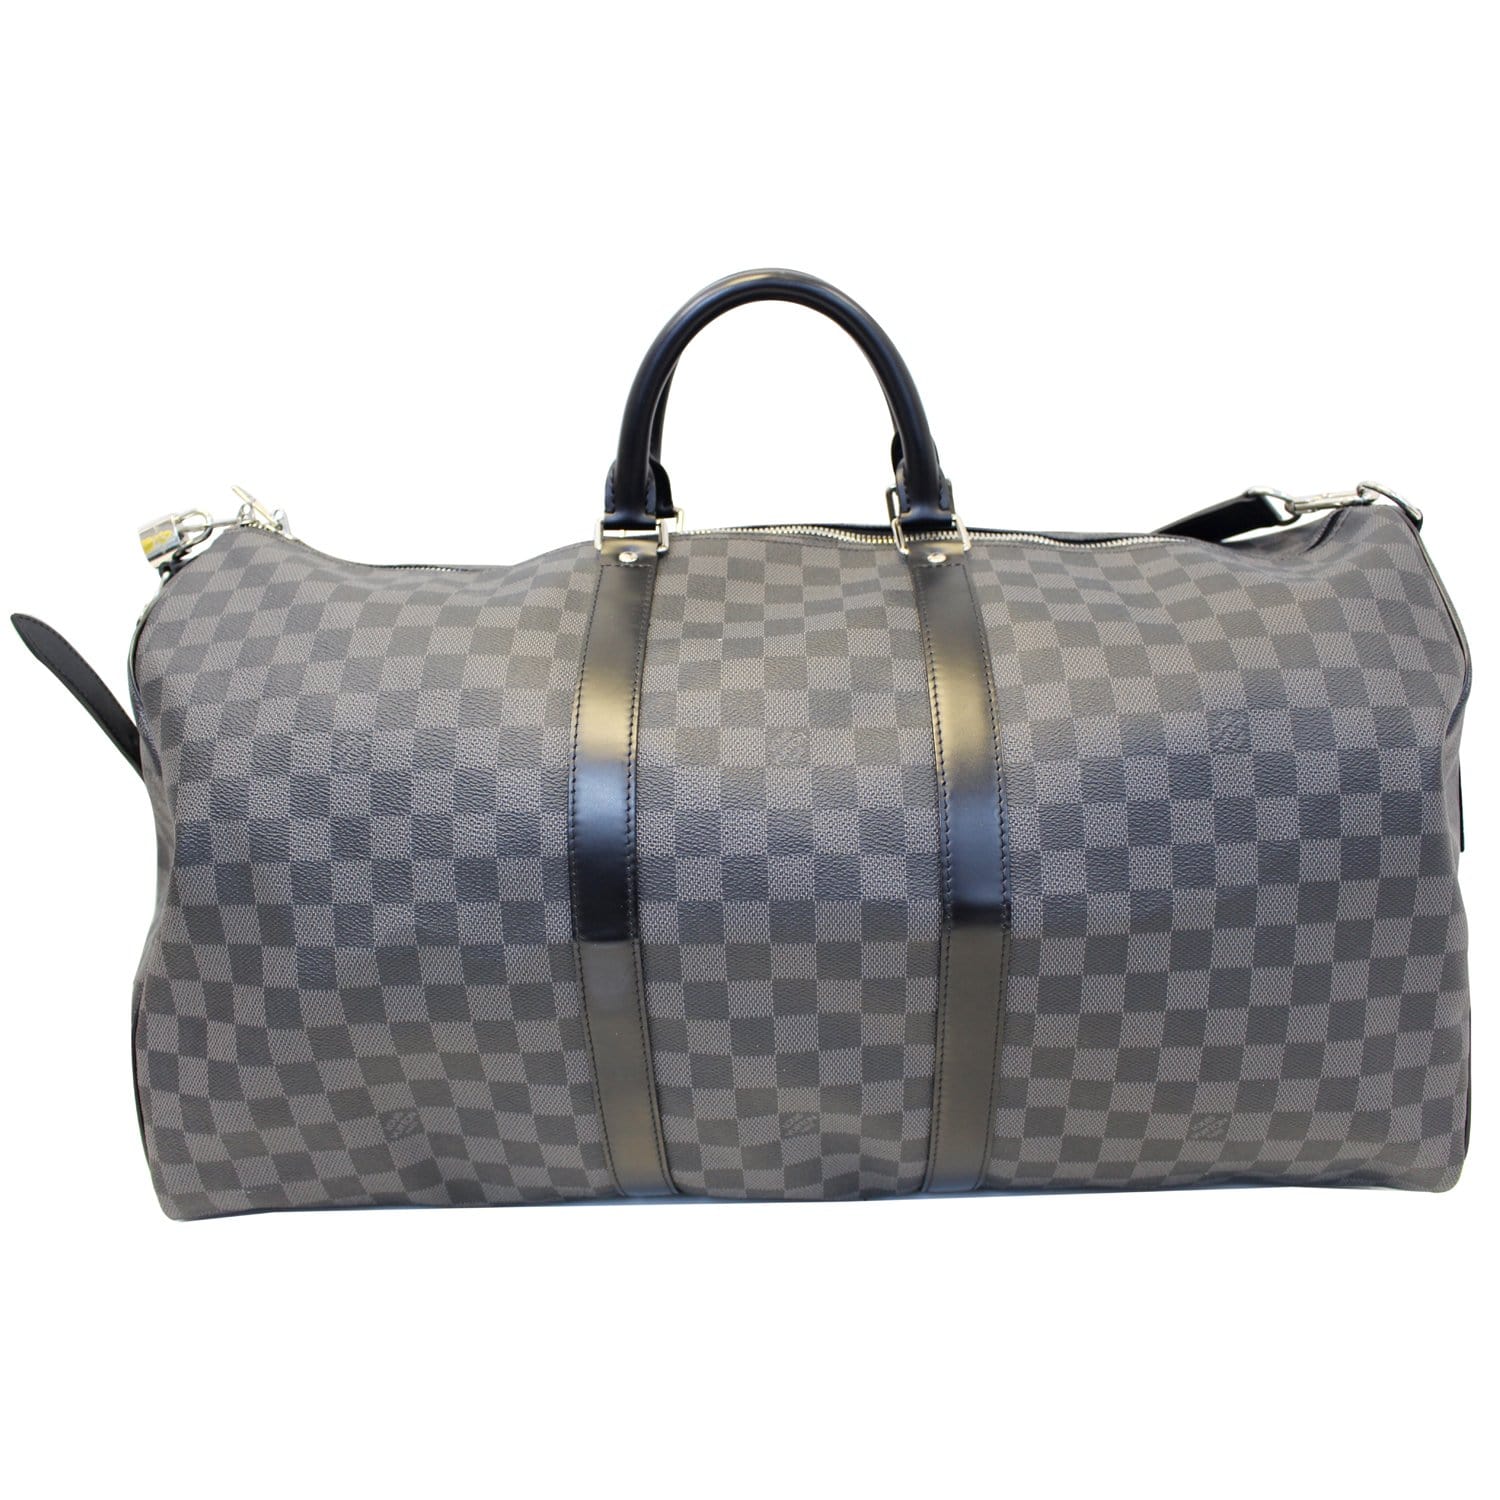 Louis Vuitton Keepall Bandouliere Bag Limited Edition Gradient